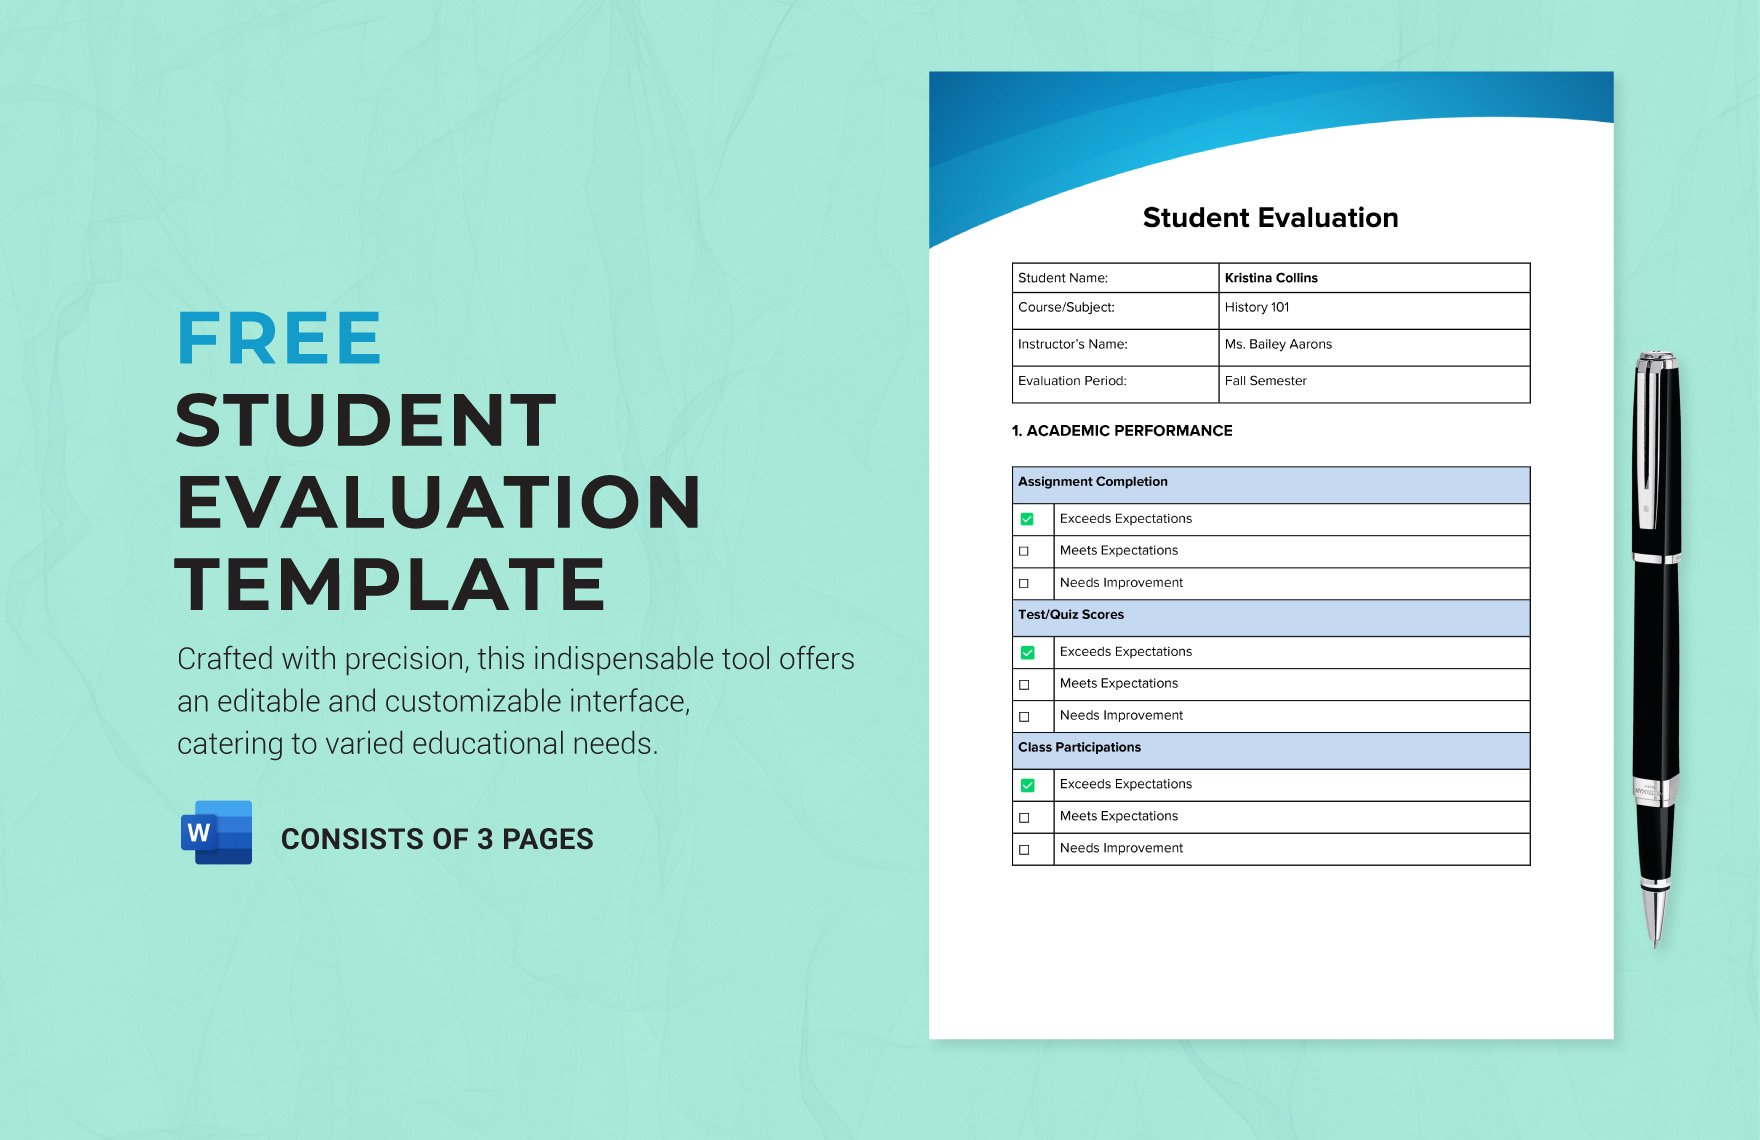 Free Student Evaluation Template in Word